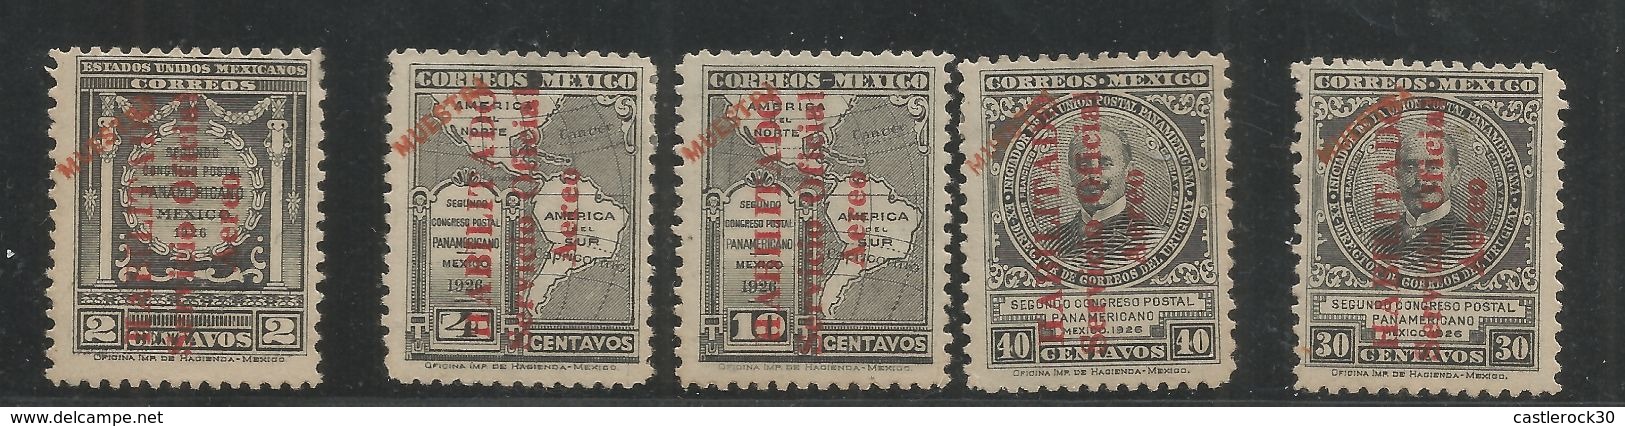 J) 1931 MEXICO, PROOF, MAP OF AMERICA, FRANCISCO GARCIA Y SANTOS, WITH OVRPRINT IN RED, MN - Mexico